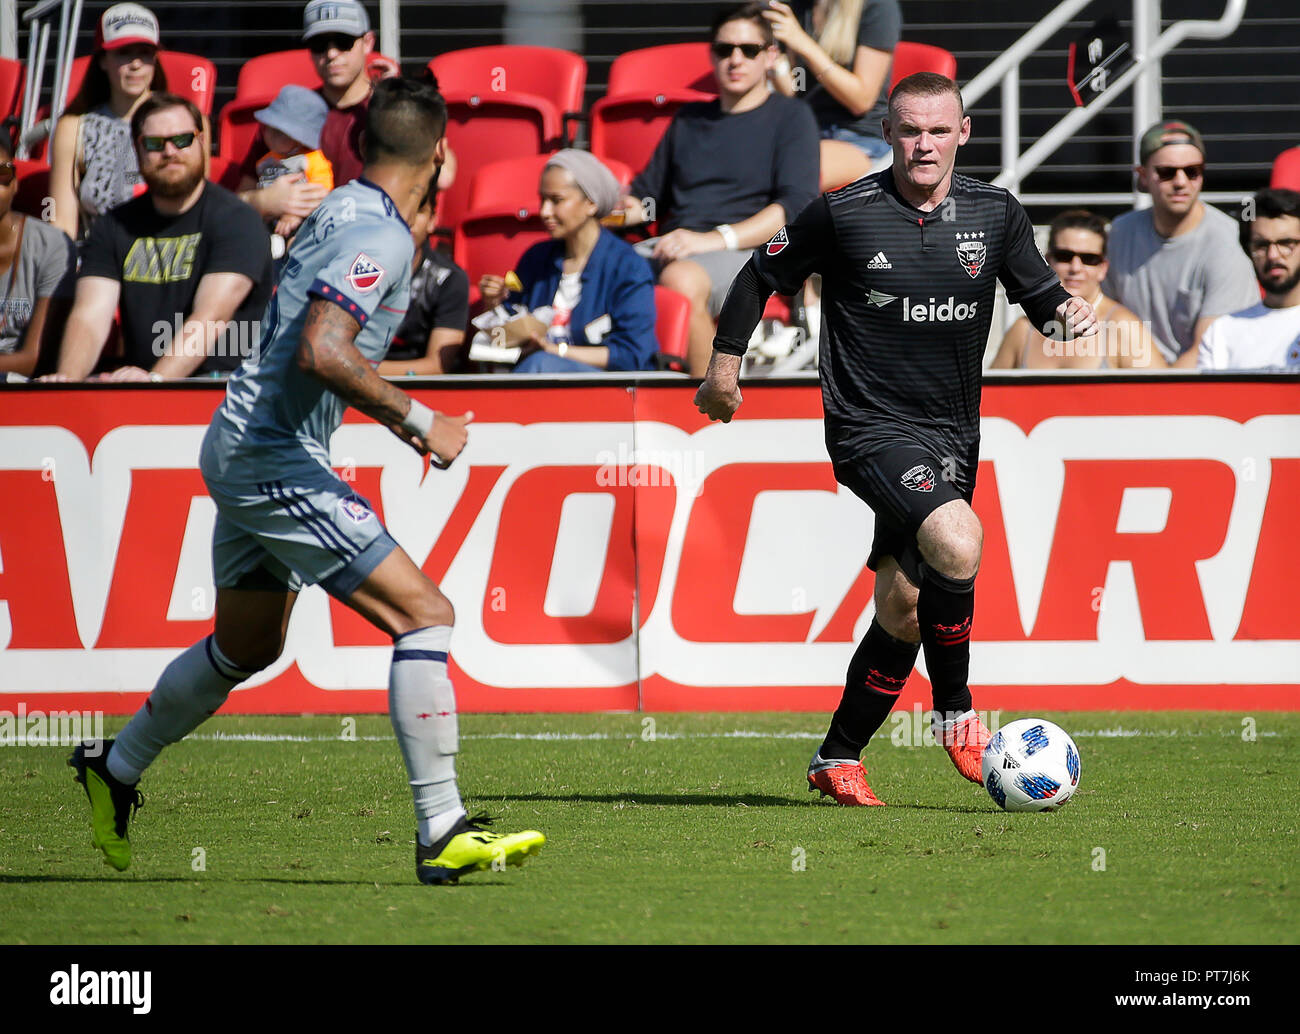 Washington DC, USA. 7th Oct, 2018. D.C. United Forward/Midfielder #9 Wayne Rooney looks to pass the ball during an MLS soccer match between the D.C. United and the Chicago Fire at Audi Field in Washington DC. Justin Cooper/CSM/Alamy Live News Stock Photo